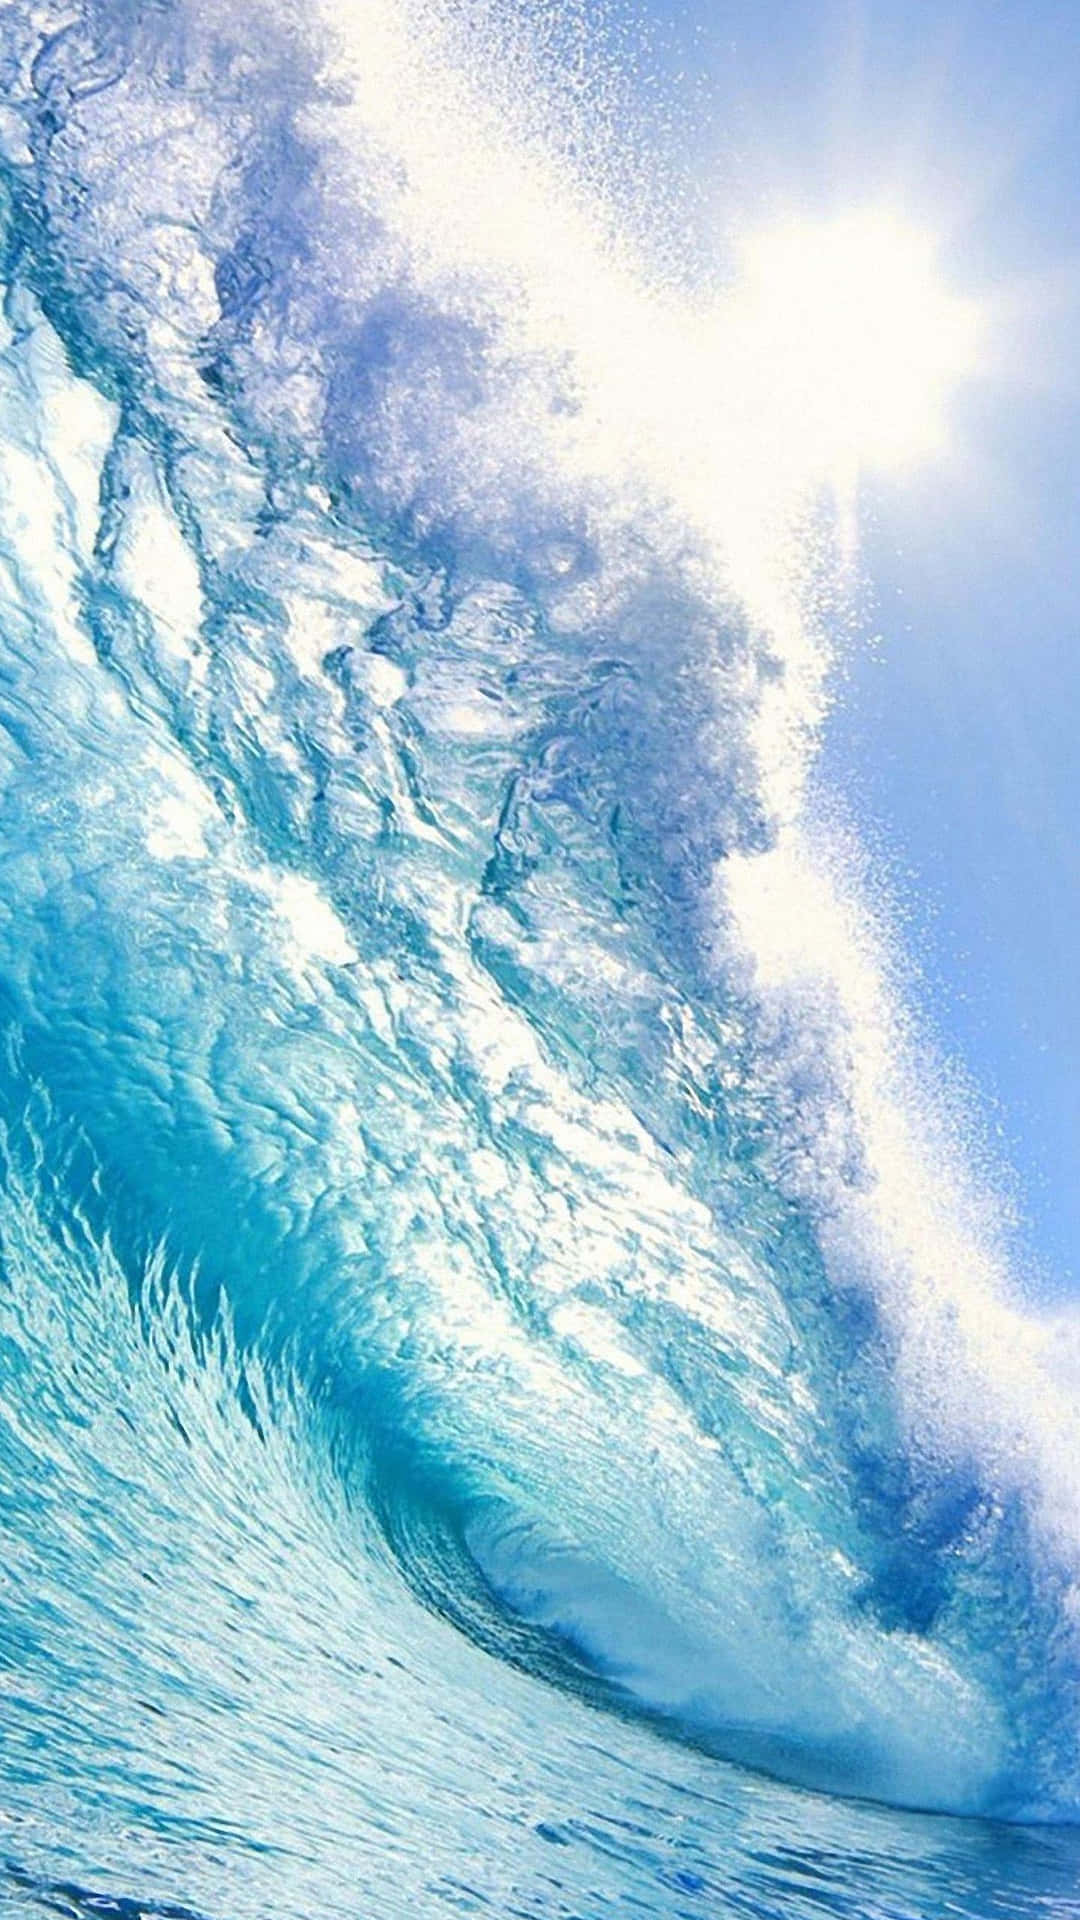 Very High Waves From The Ocean Wallpaper